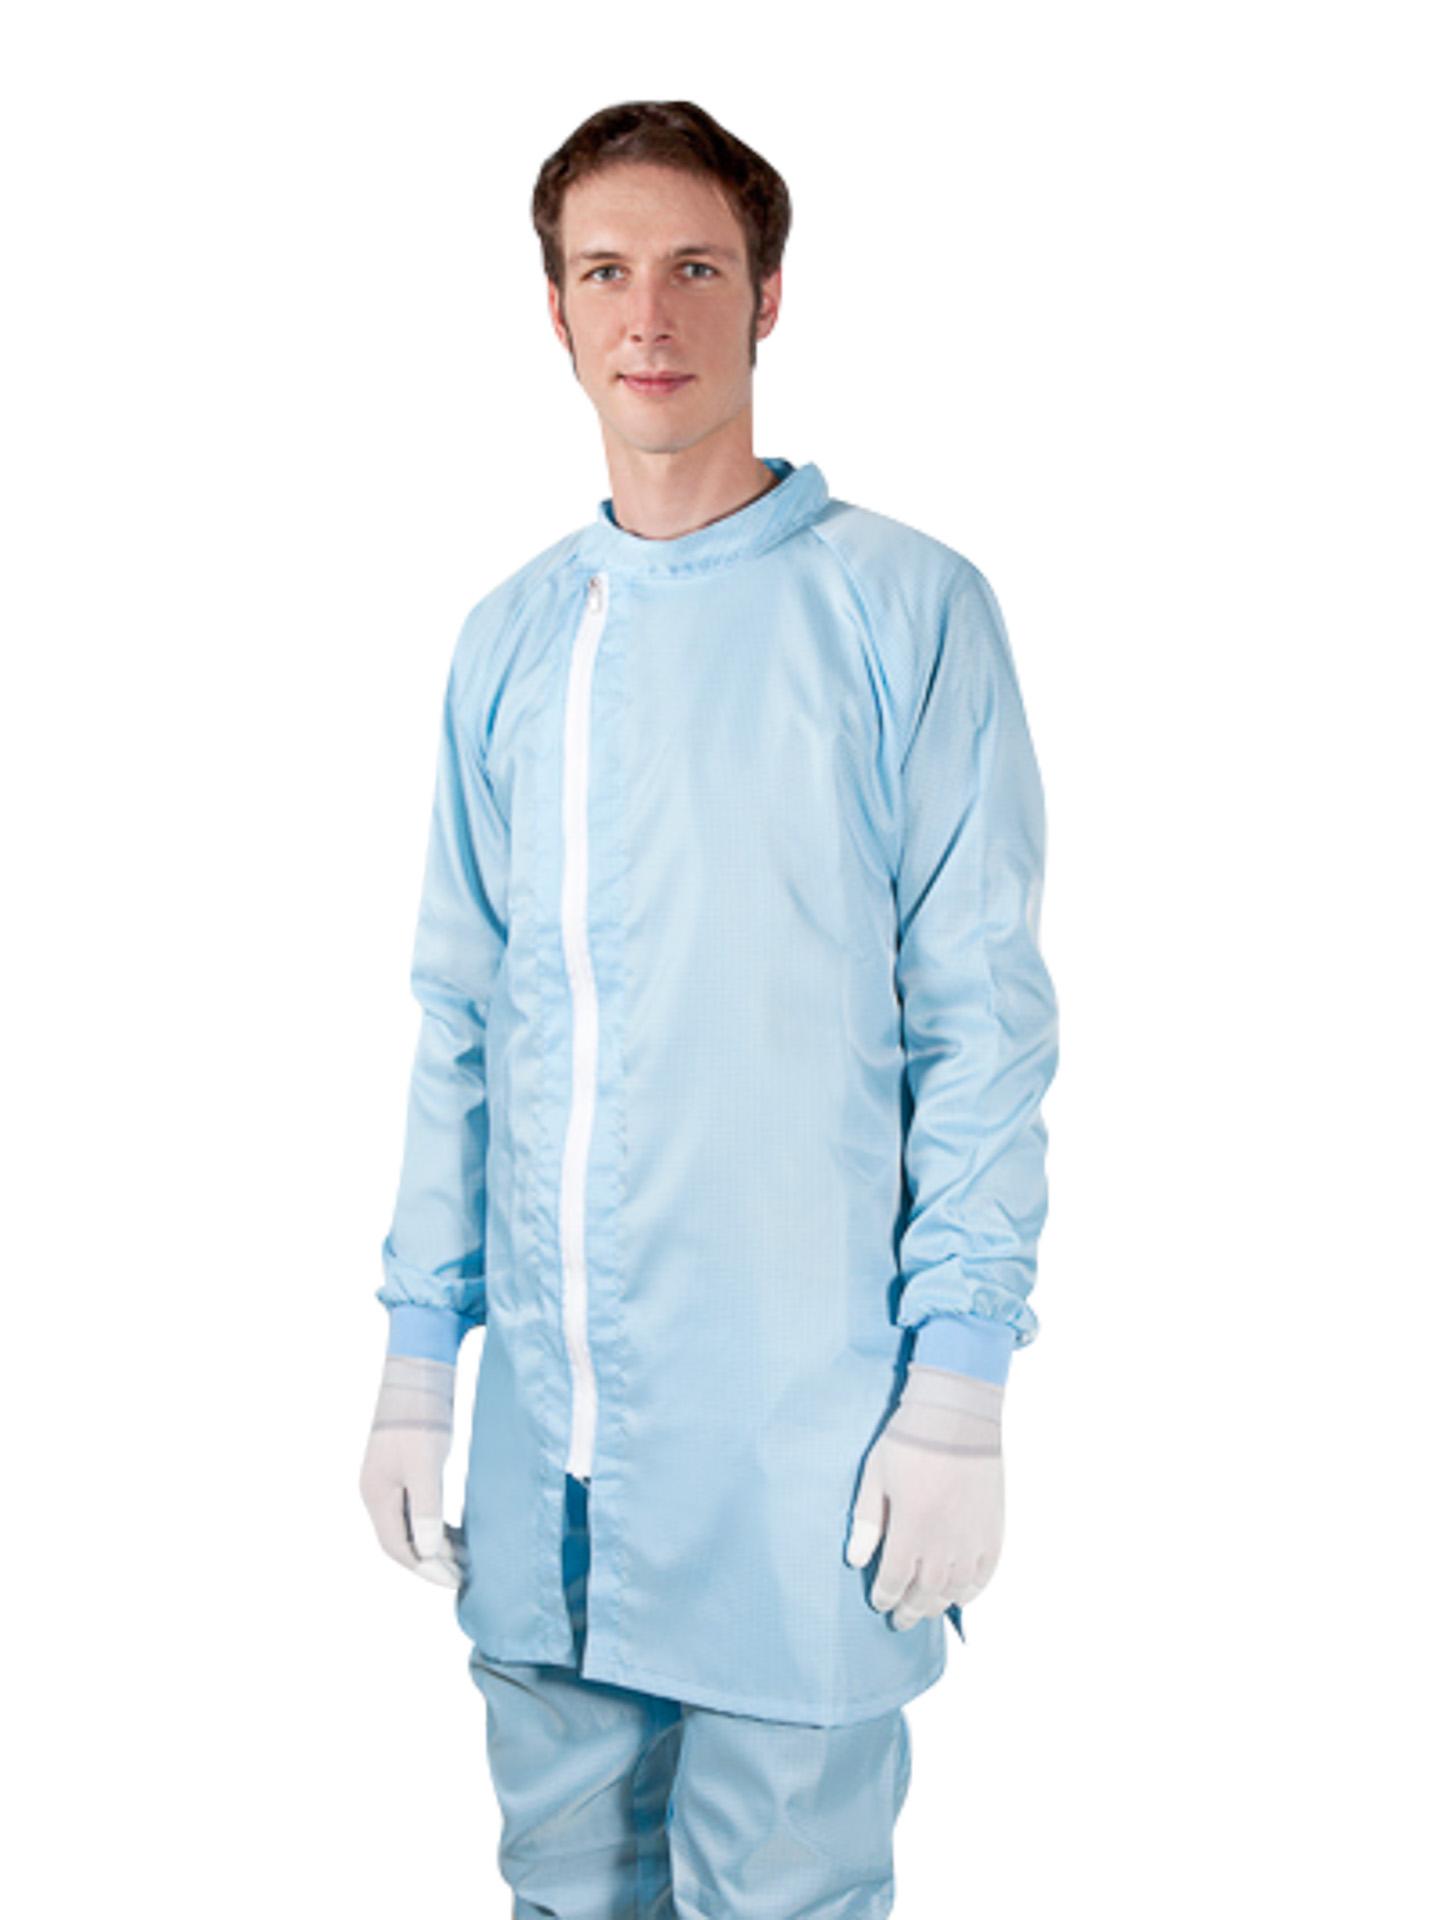 Reusable cleanroom jacket with zipper